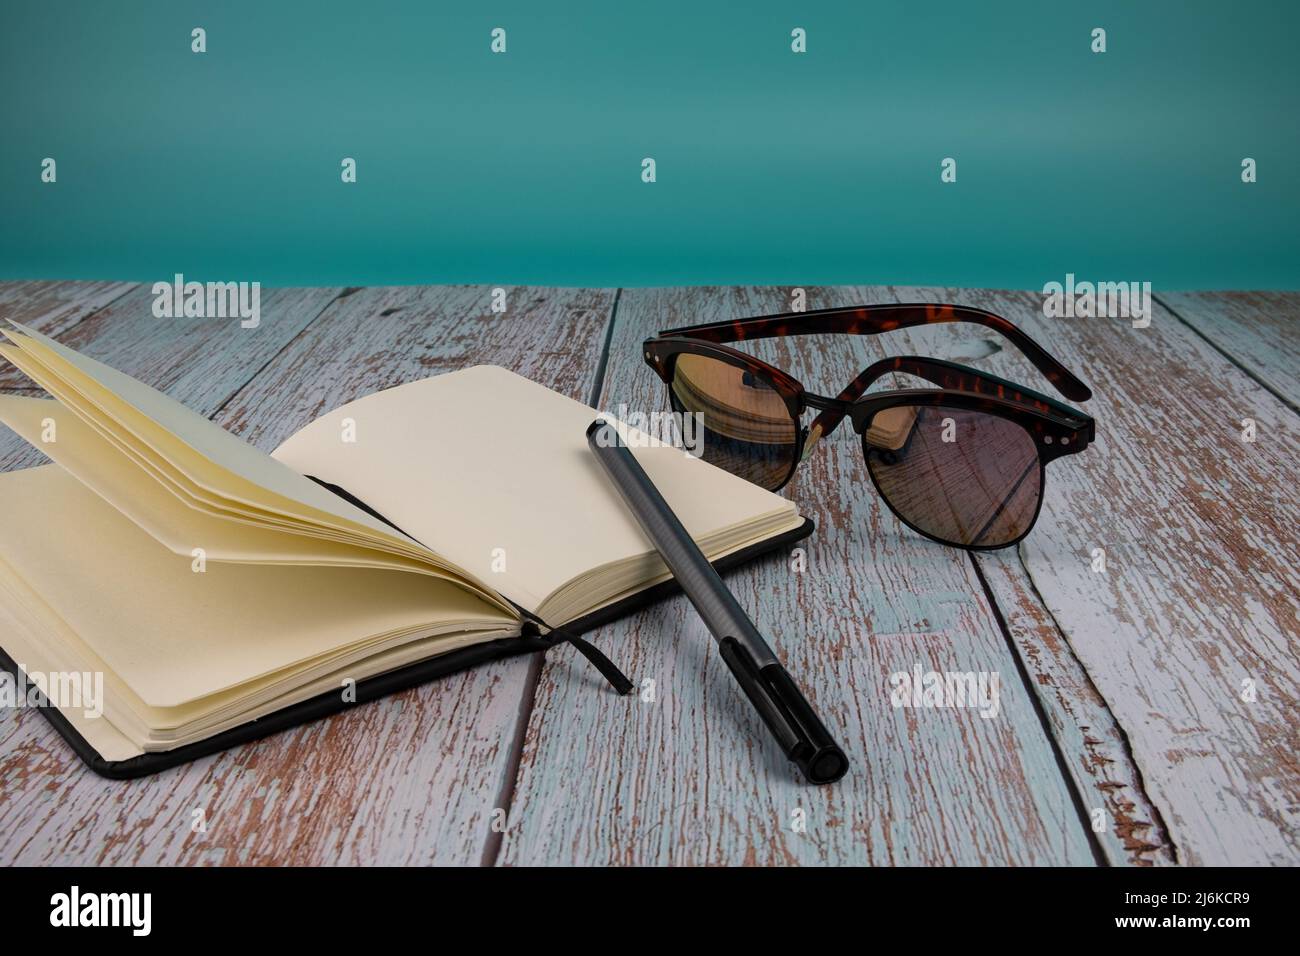 Notebook with a pen and sunglasses, on a wooden table with a light blue background. Free time concept. Stock Photo